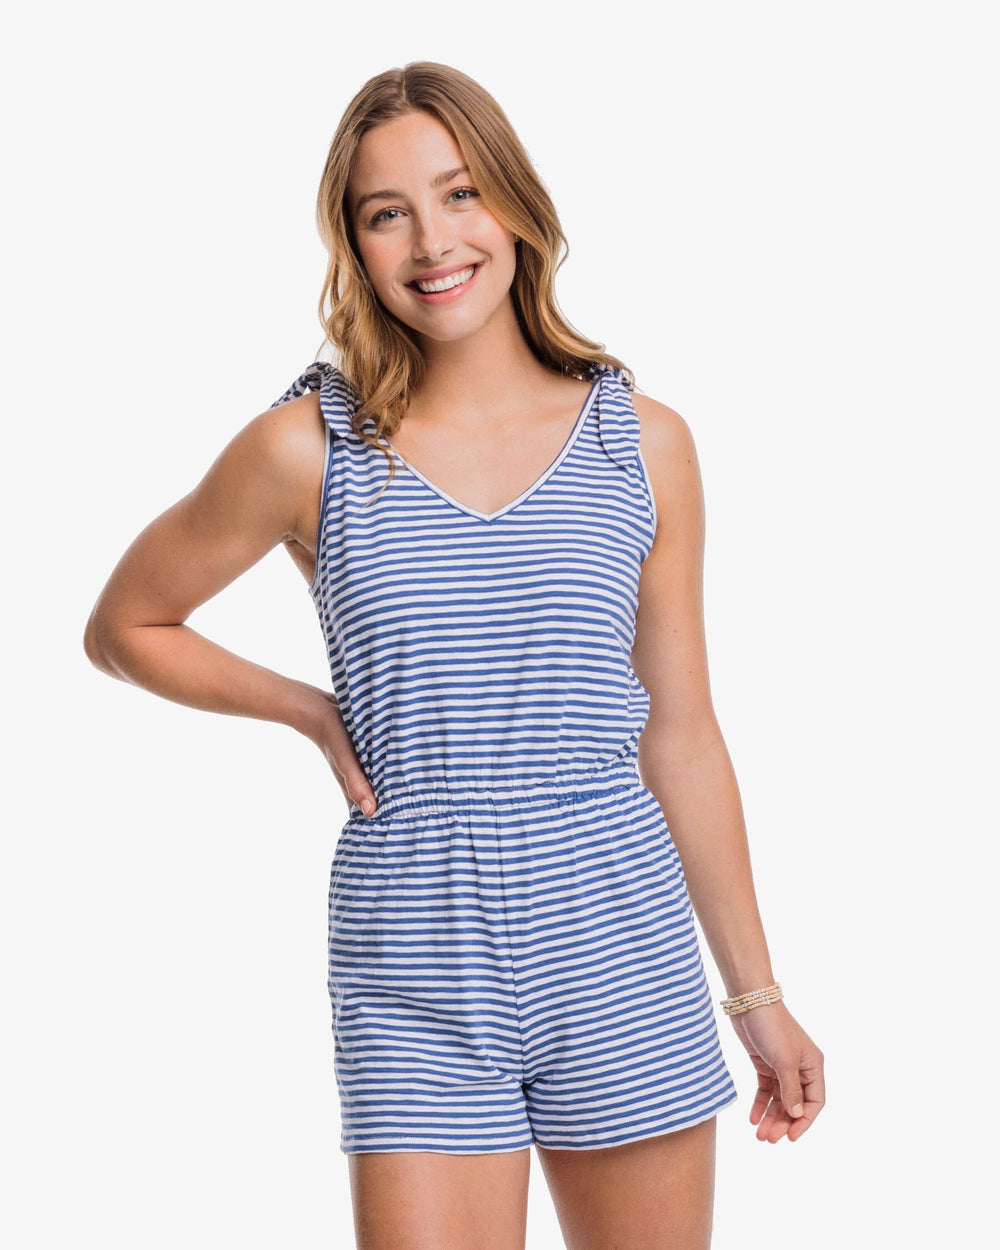 The front view of the Southern Tide Tillie Stripe Sun Farer Tie Shoulder Romper by Southern Tide - Nautical Navy